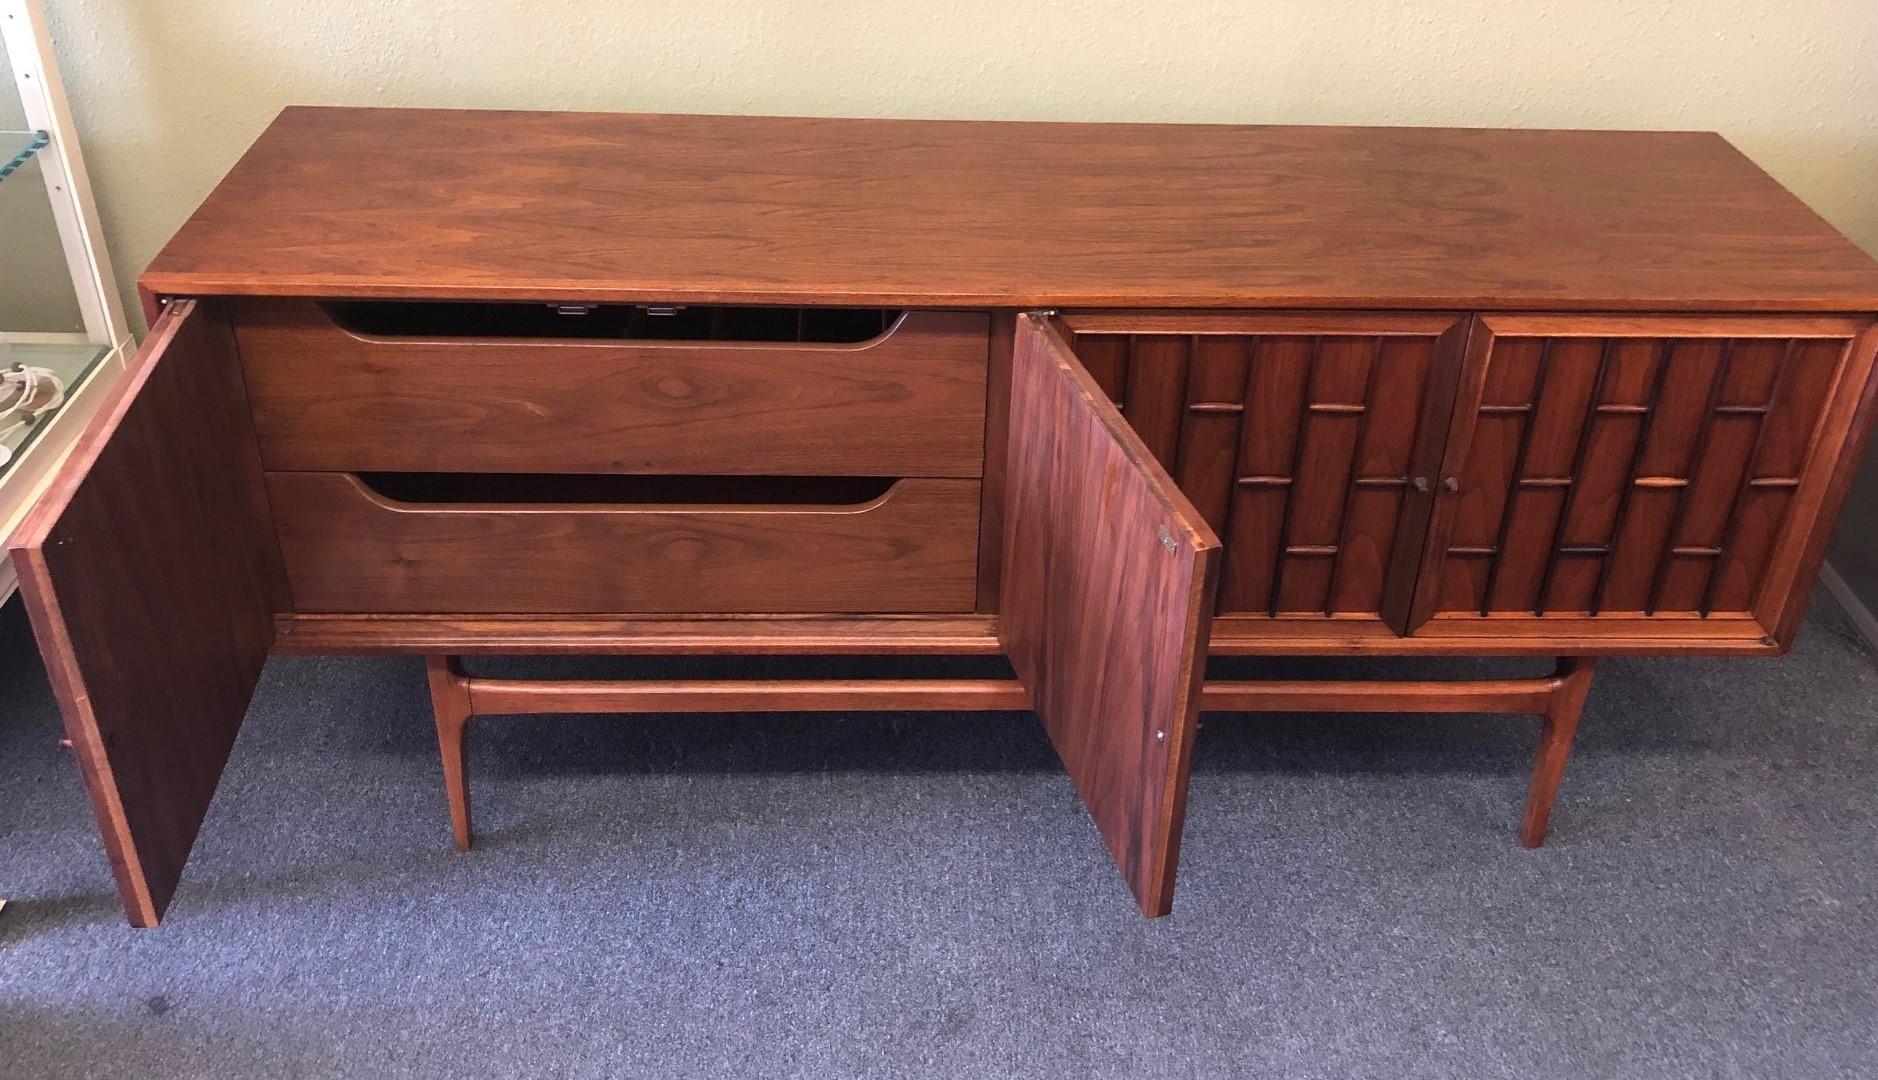 20th Century Mid-Century Modern Walnut and Rosewood Credenza by Thomasville